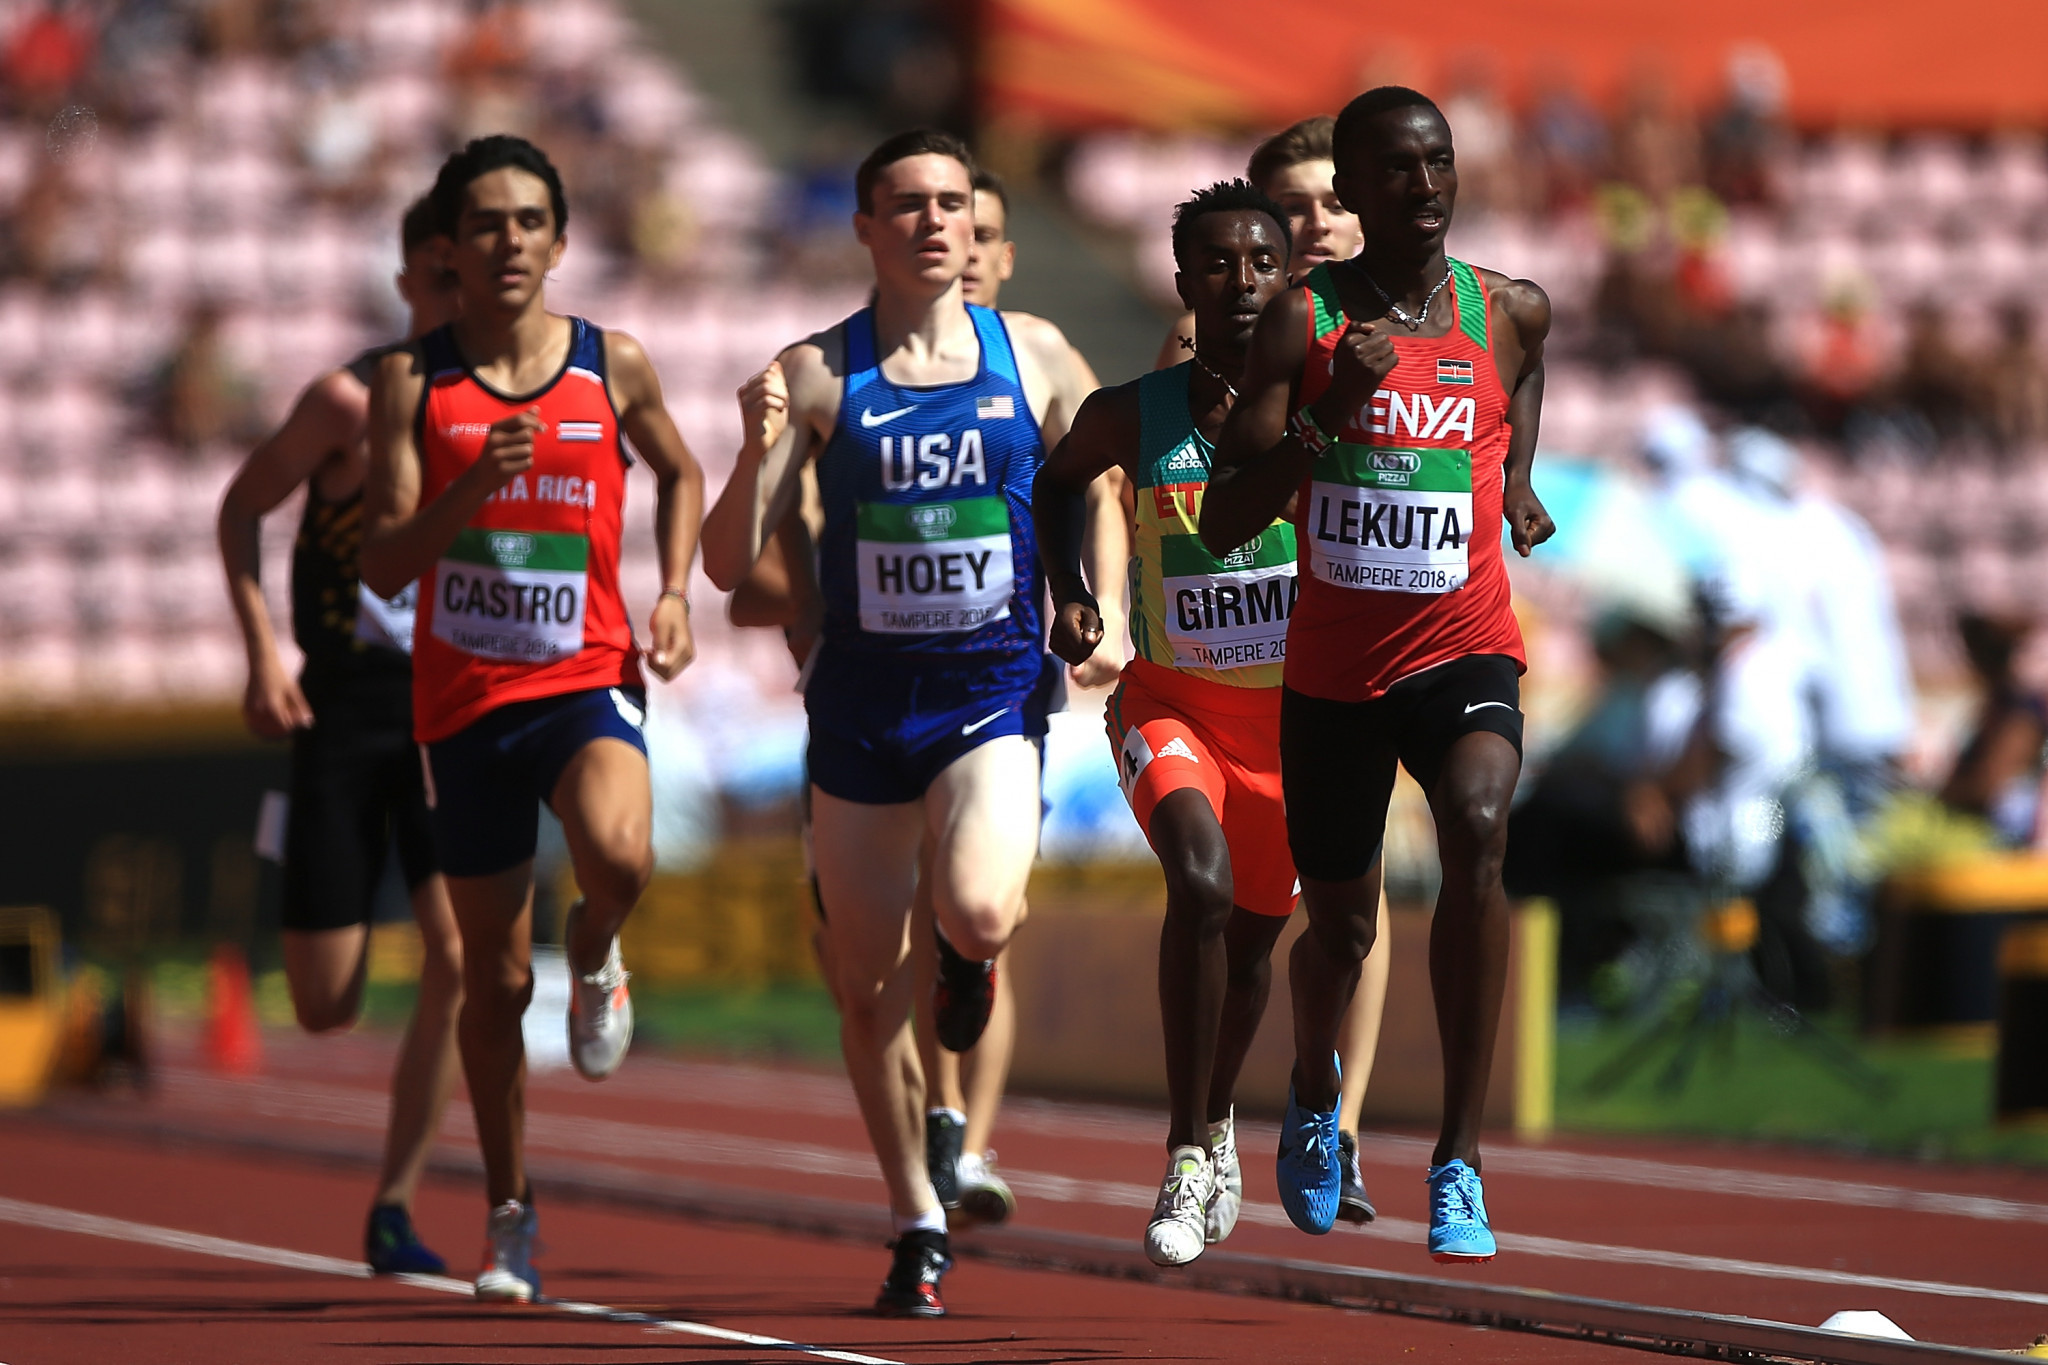 Kenya's Solomon Lekuta won 800m gold at the IAAF World Under-20 Championships in Tampere ©Getty Images  